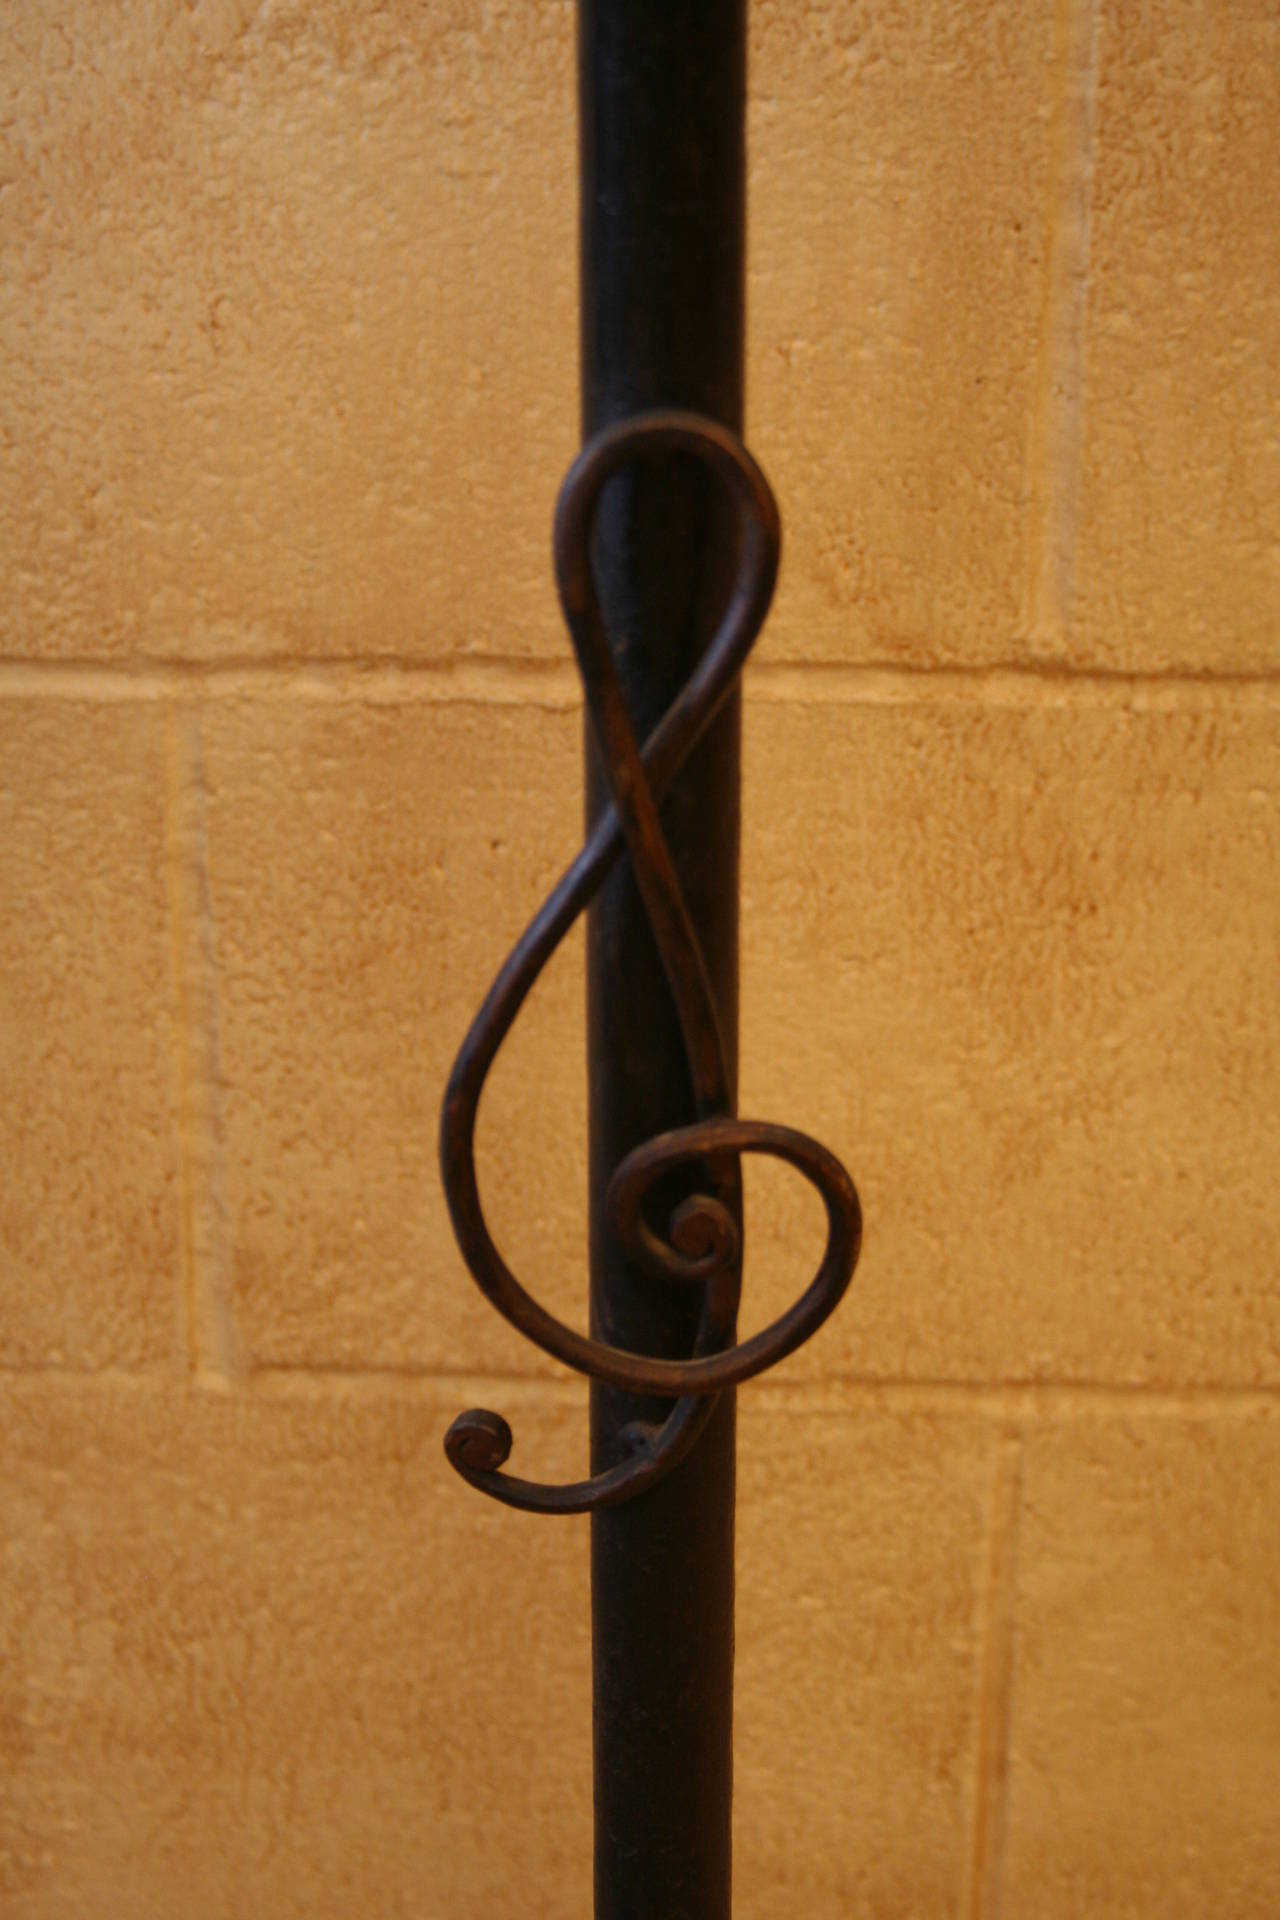 This artisan made iron music stand features two candleholders designed to light one's sheets of music. Accented by a gold tipped treble clef, this will make a wonderful decorative piece for any music lover, and a useful accessory for any musician.